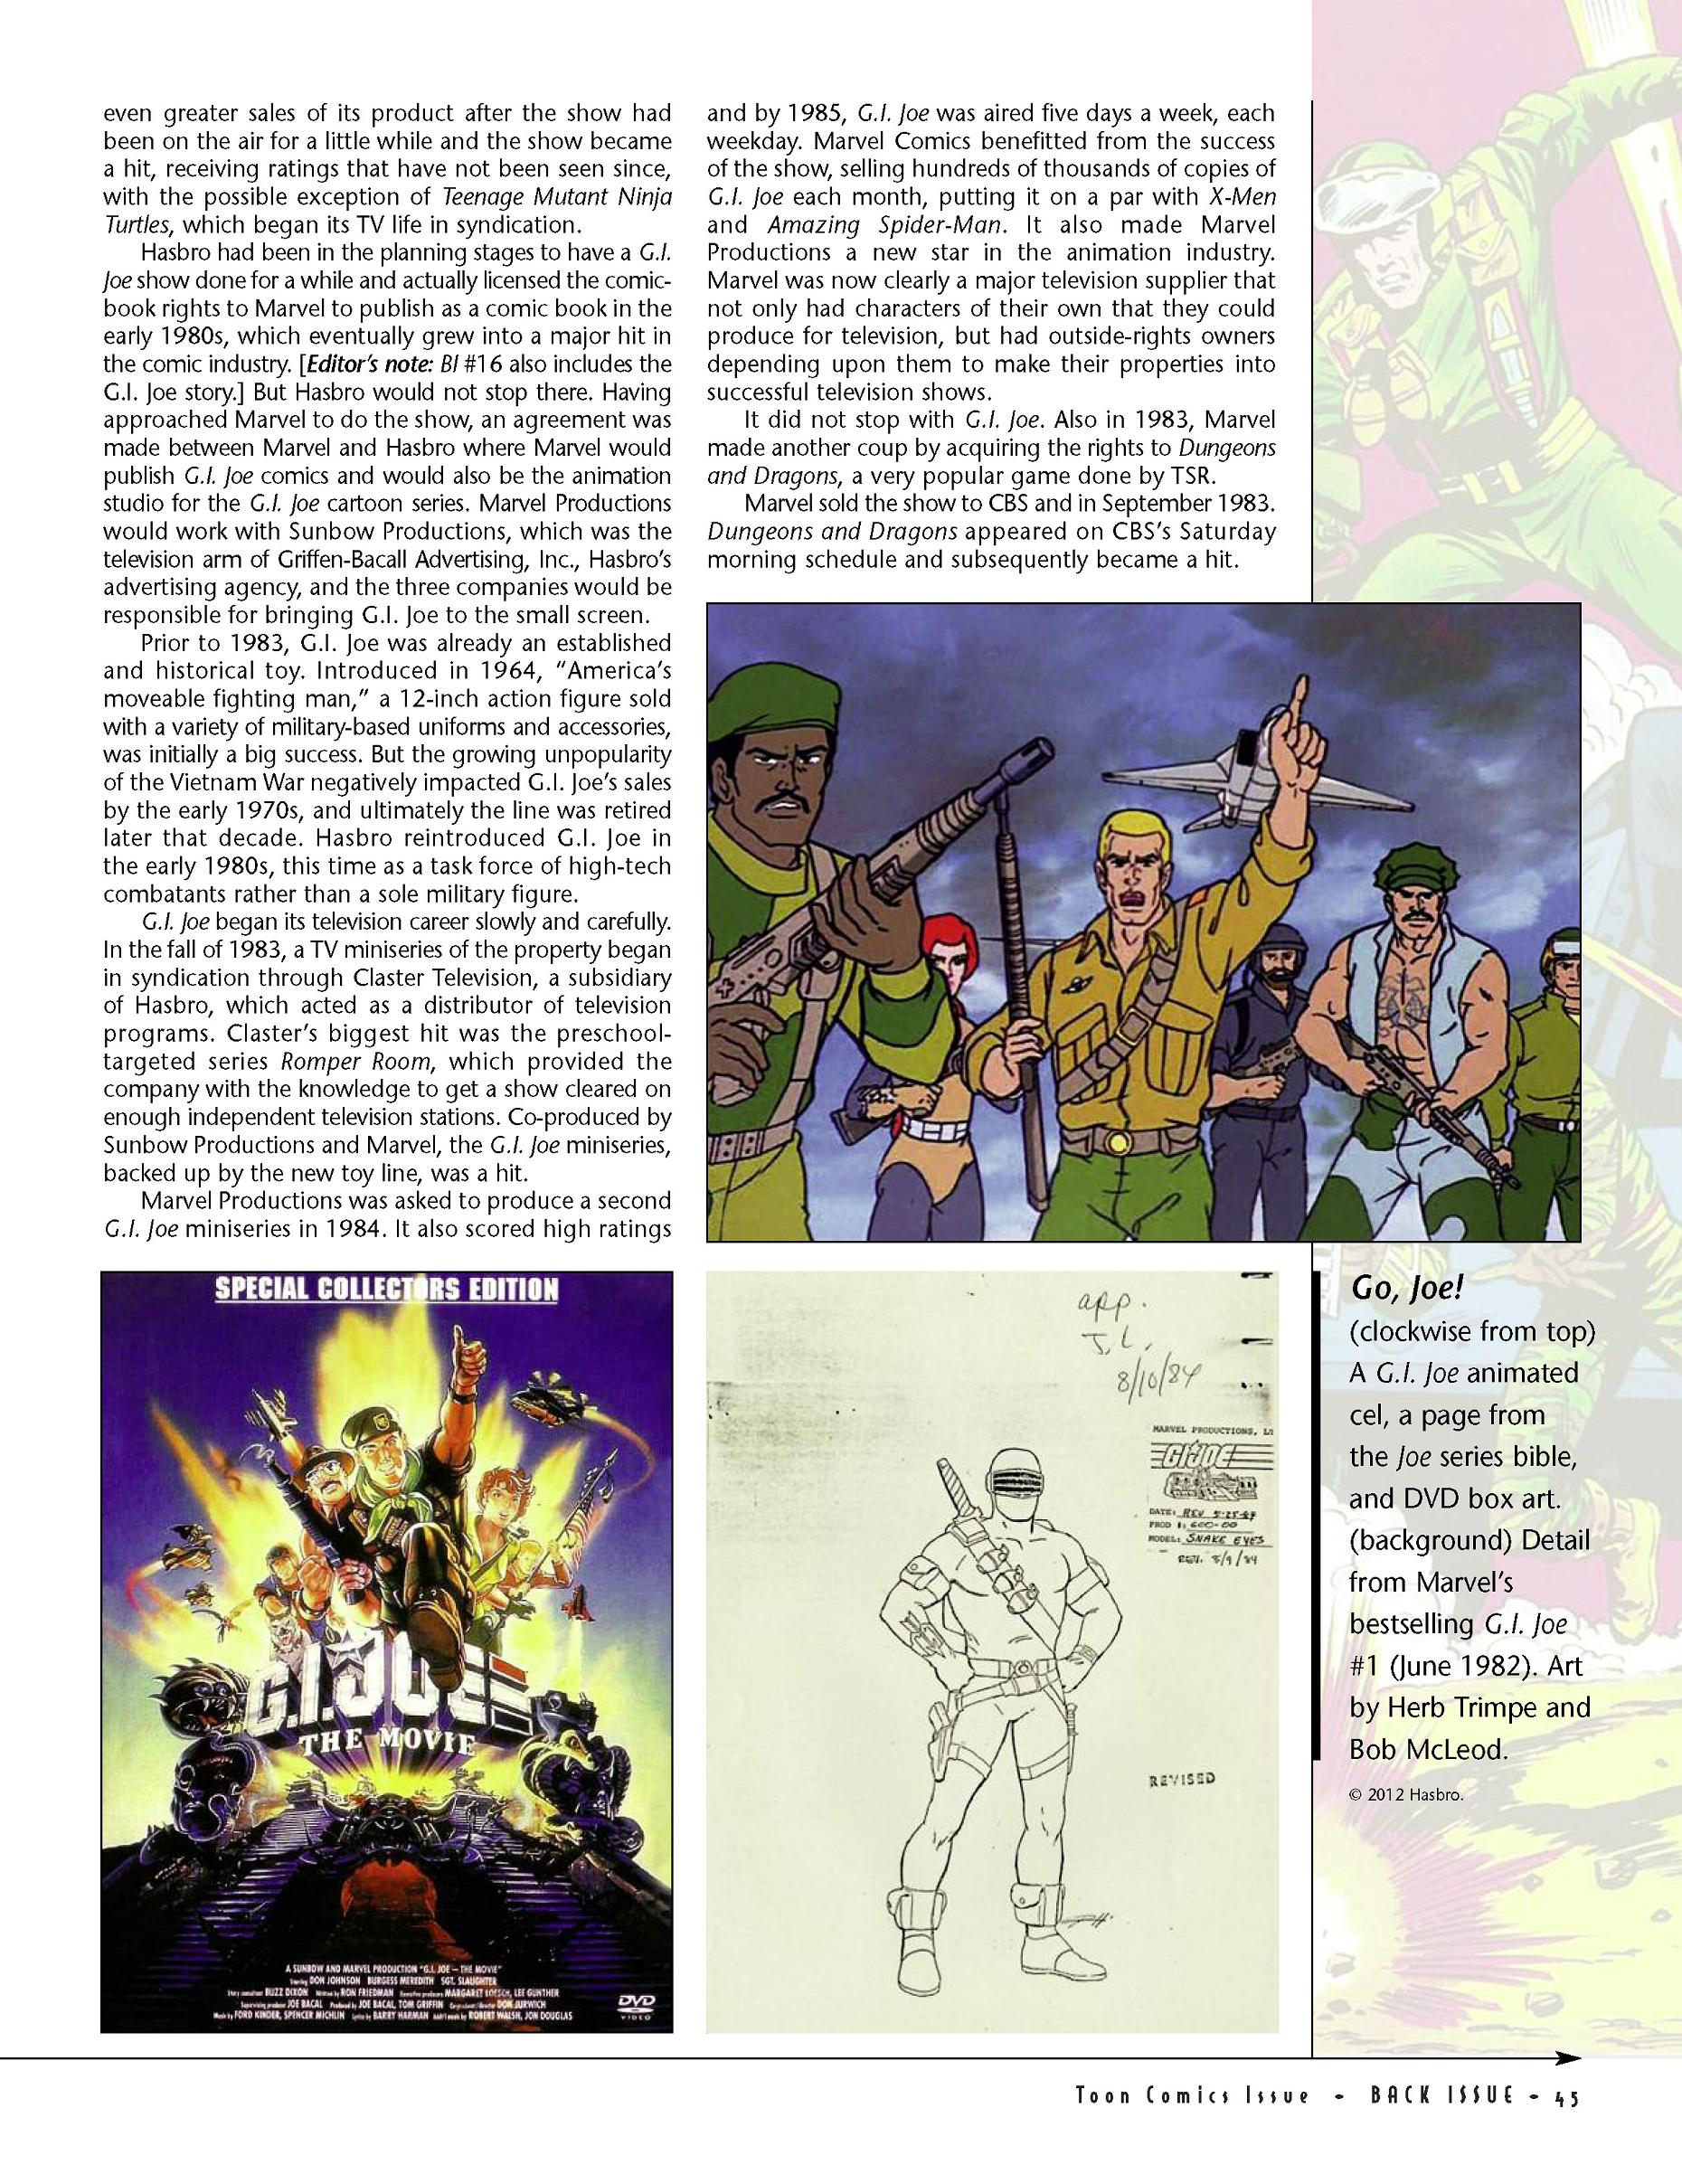 Read online Back Issue comic -  Issue #59 - 45